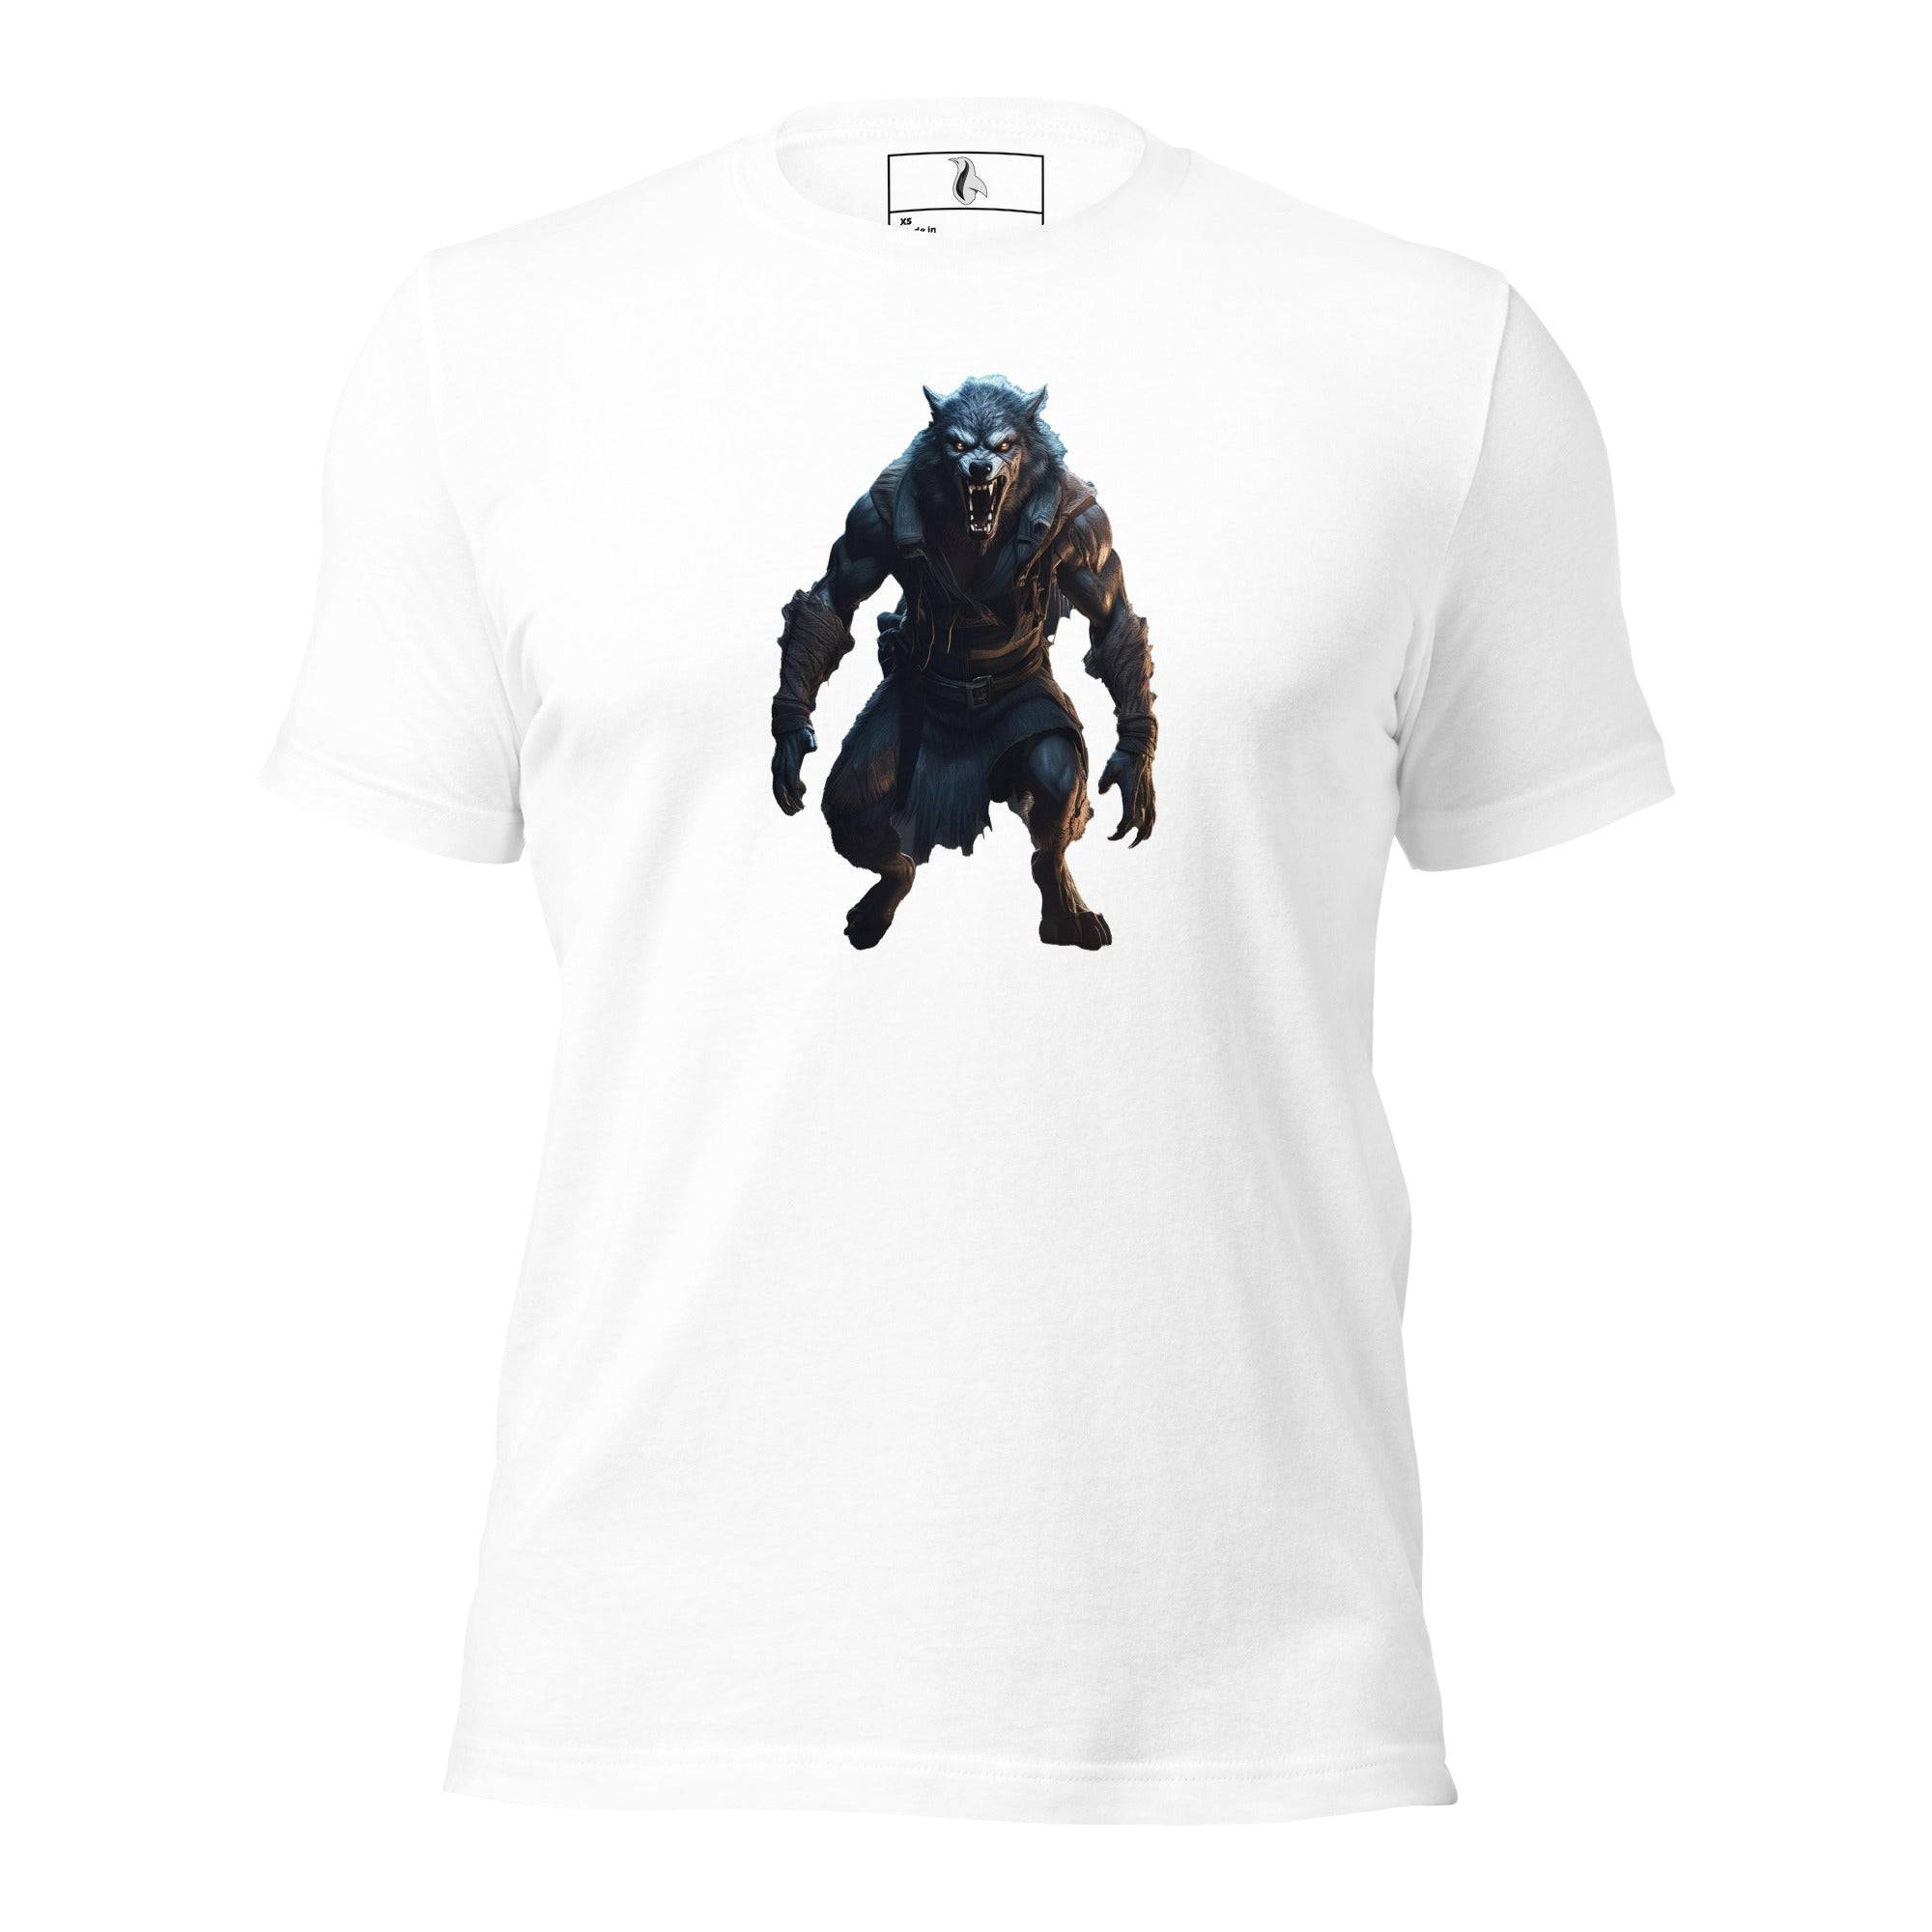 The Monster Squad "Wolfman" Unisex t-shirt